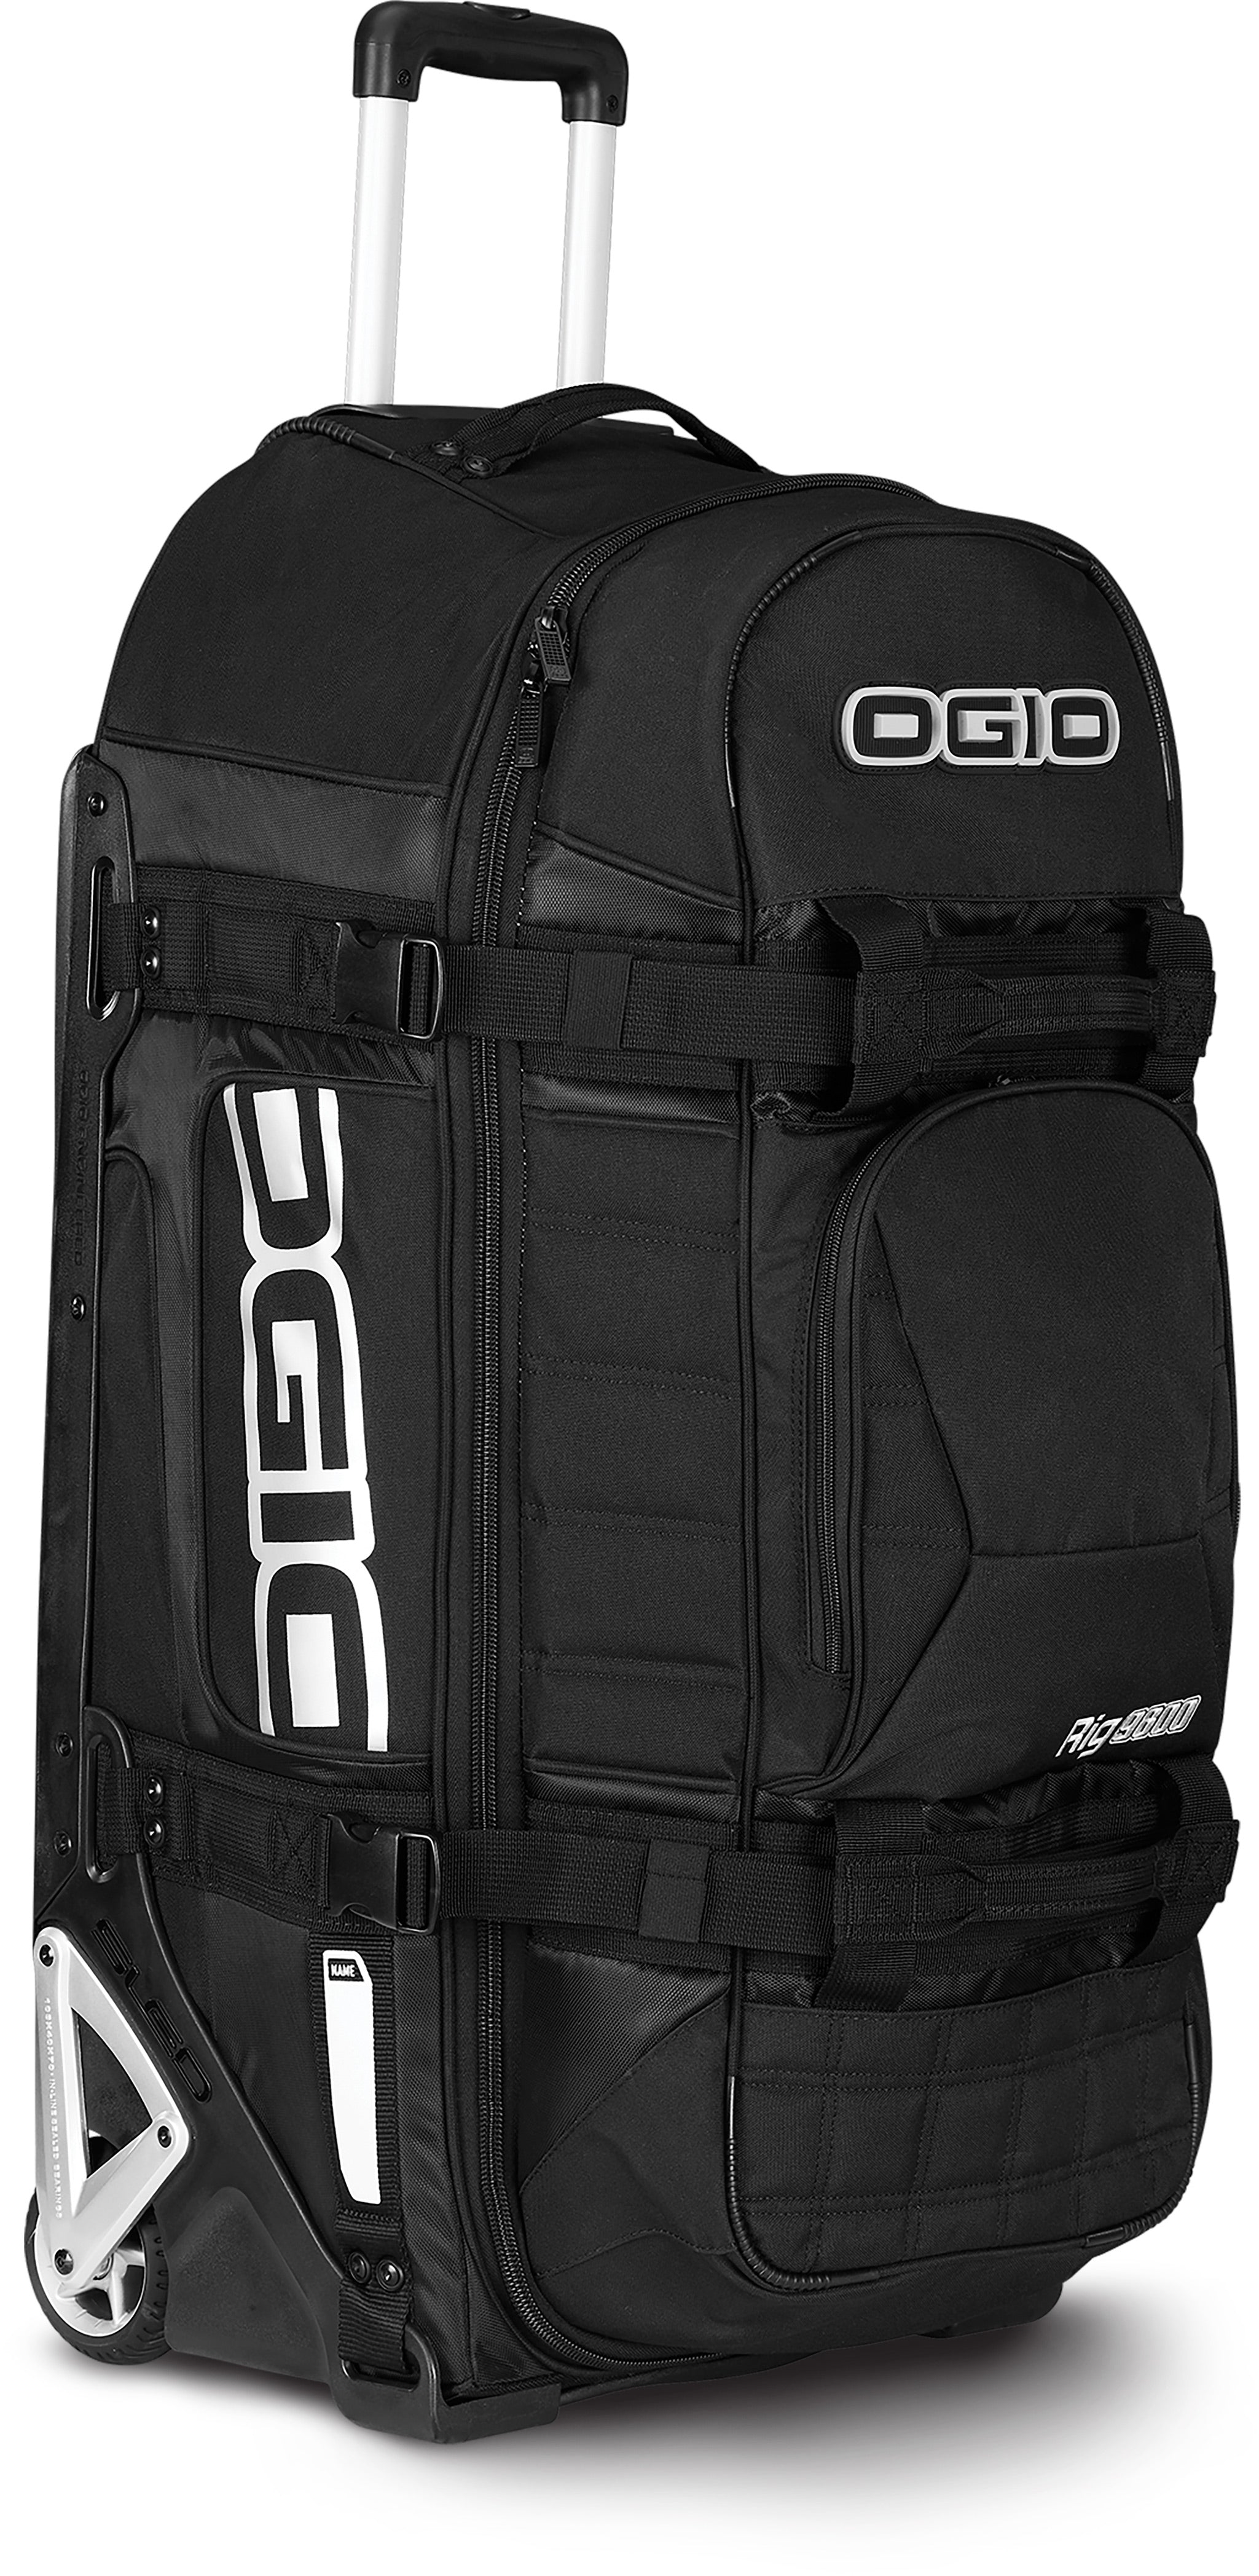 Rig 9800 wheeled gear bag in black color showing its durability and spacious compartments